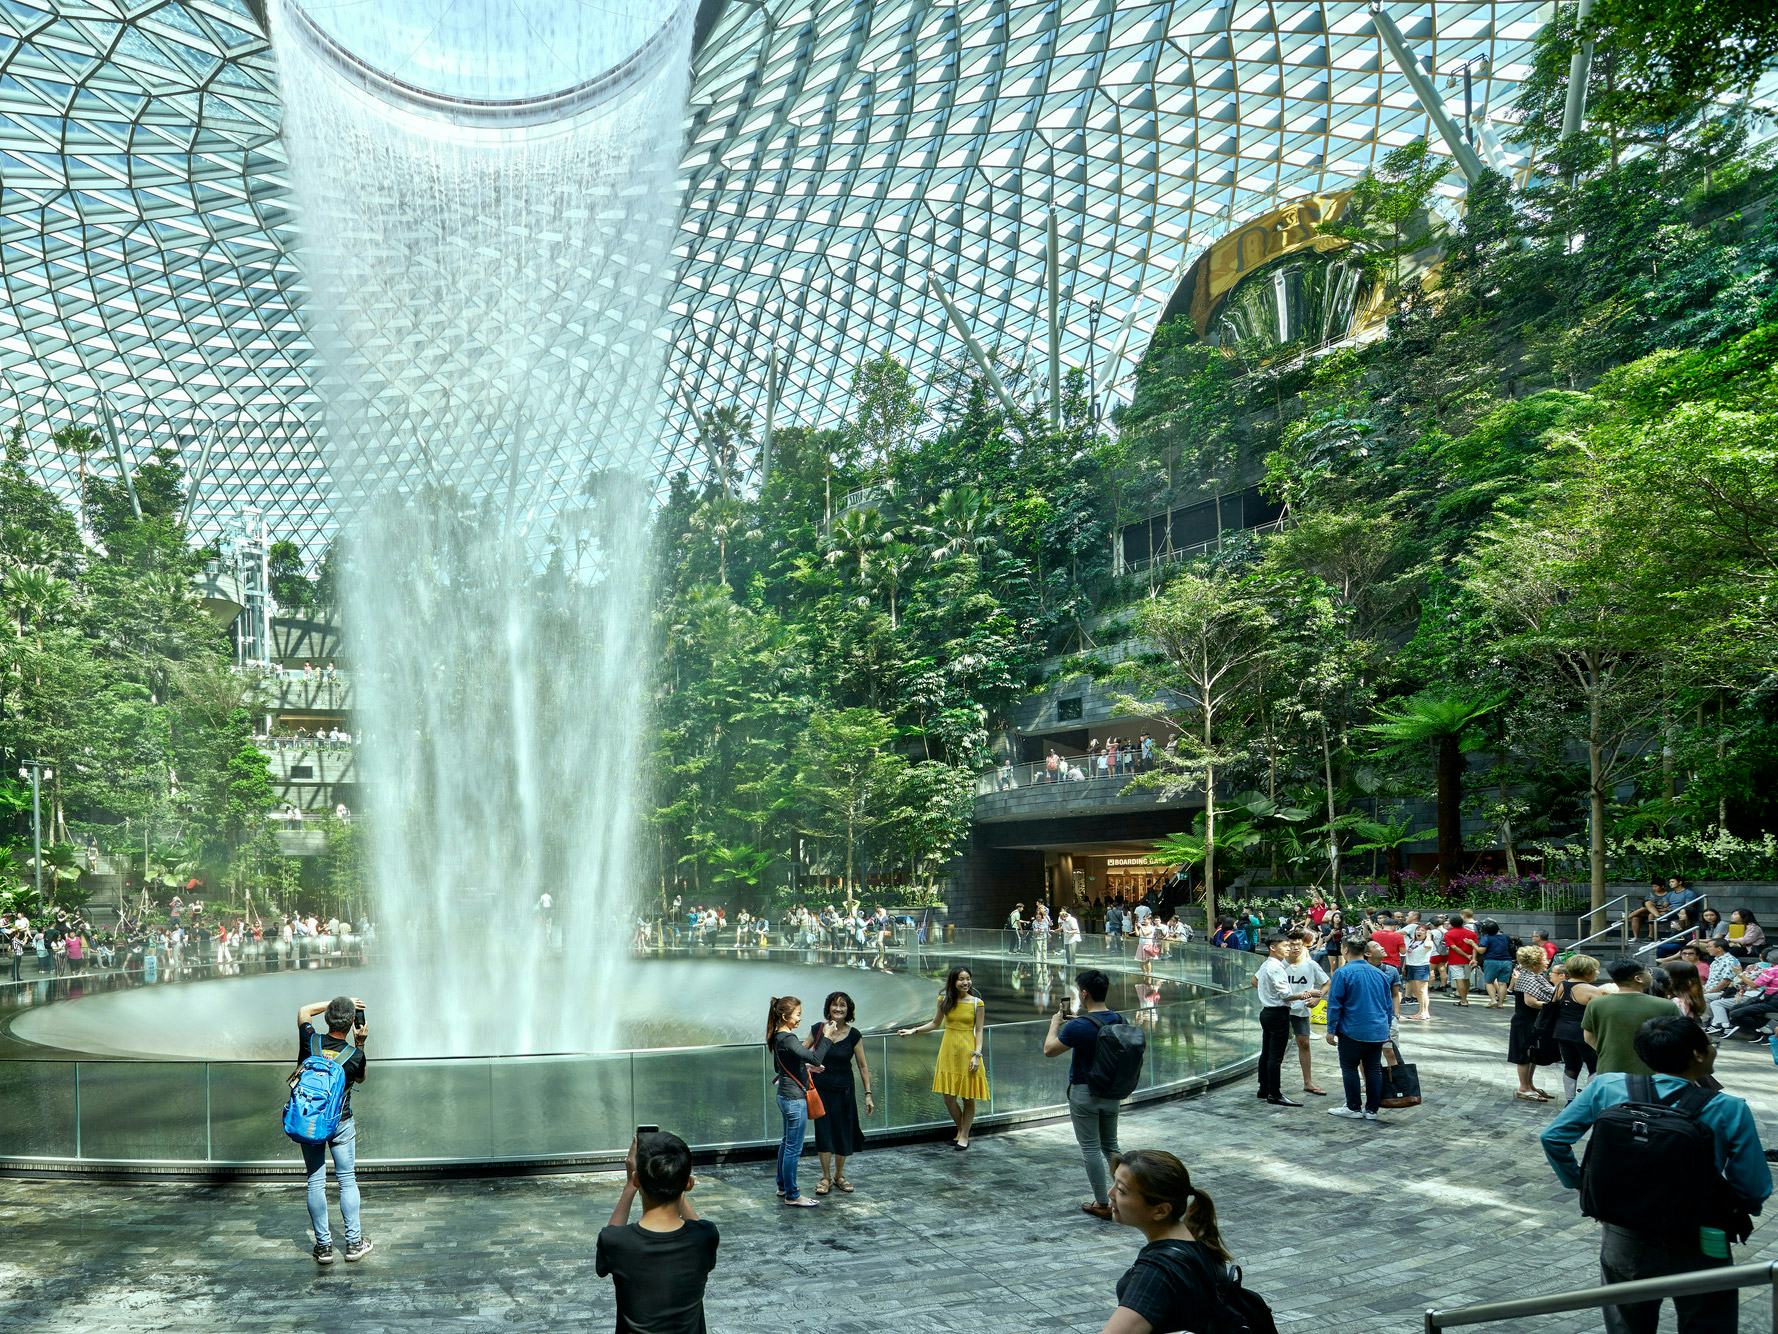 The details in the design of Changi Airport